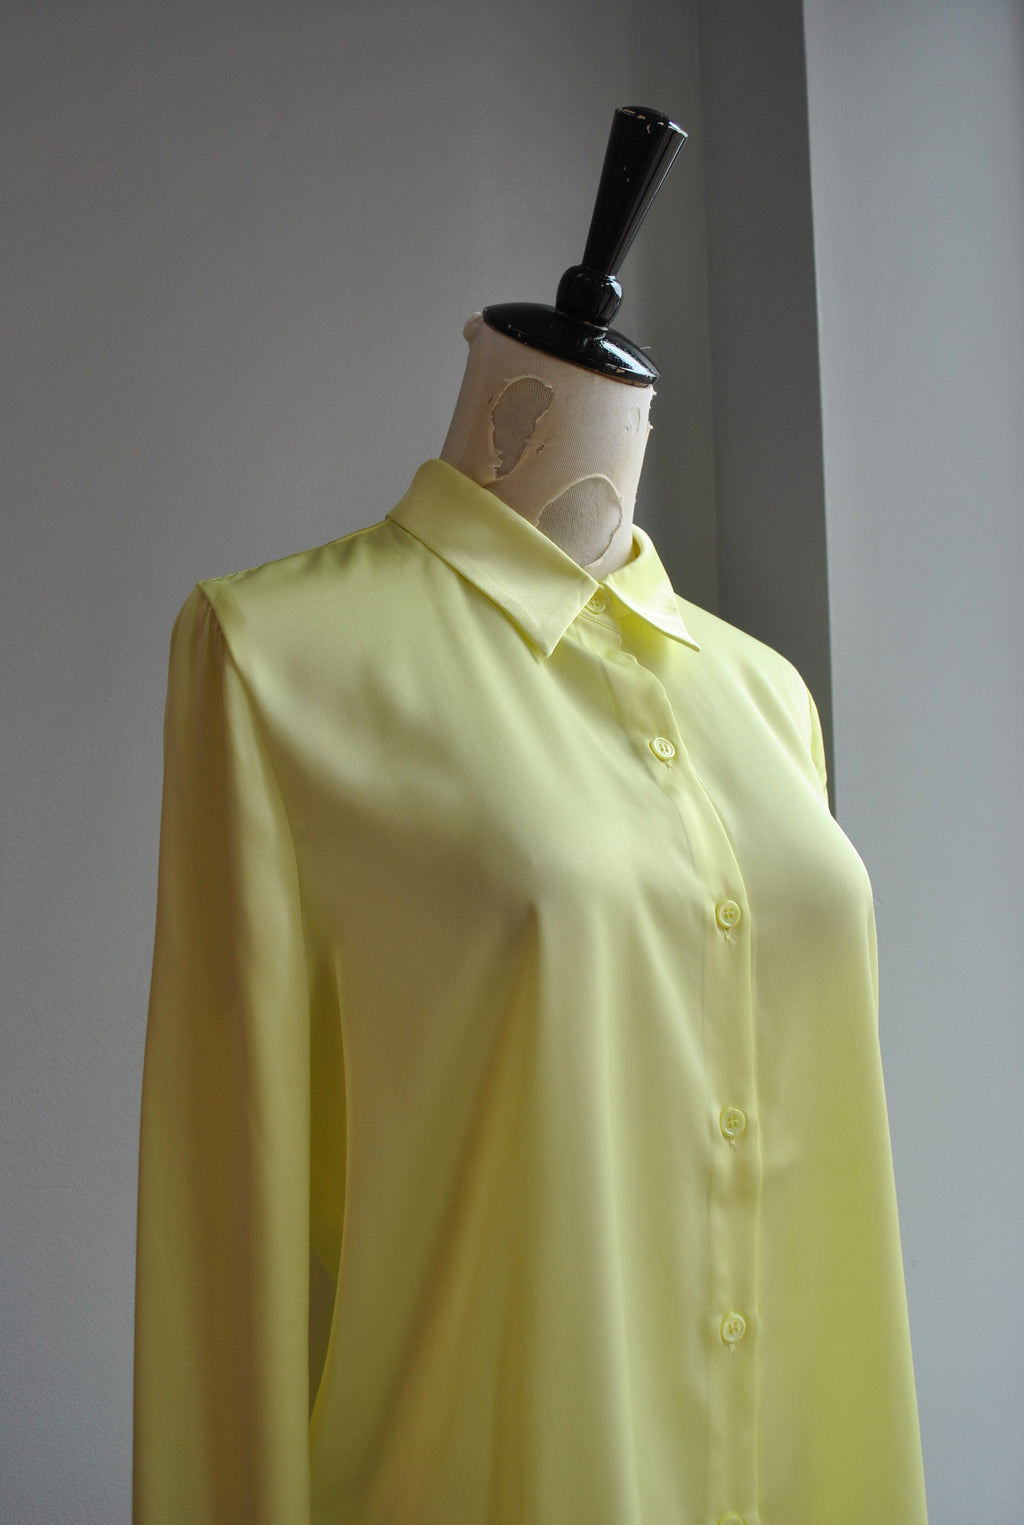 YELLOW SILKY BLOUSE